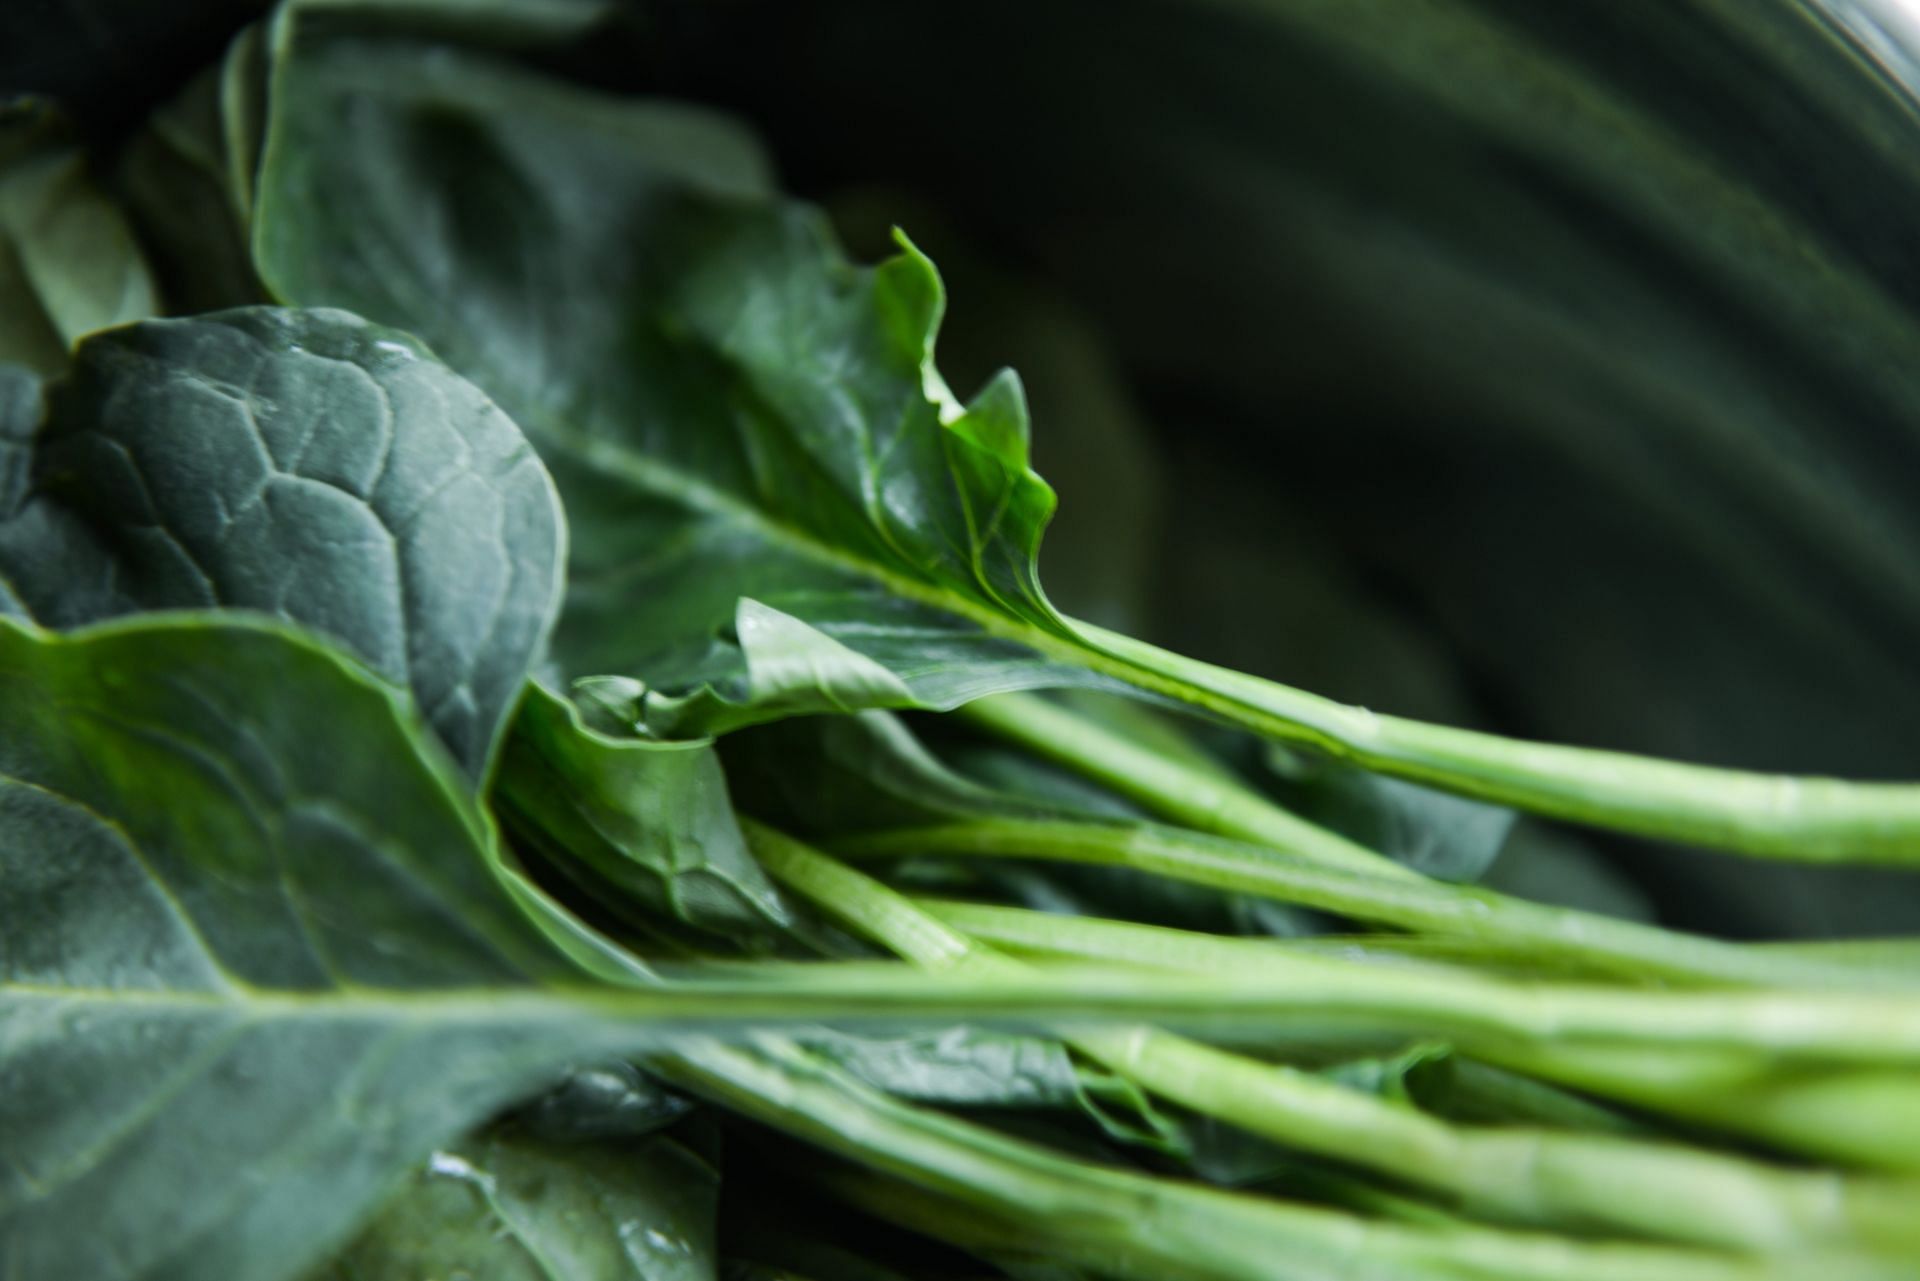 Collard greens can add magic to your steaming foods (Image via Pexels/Cats Coming)